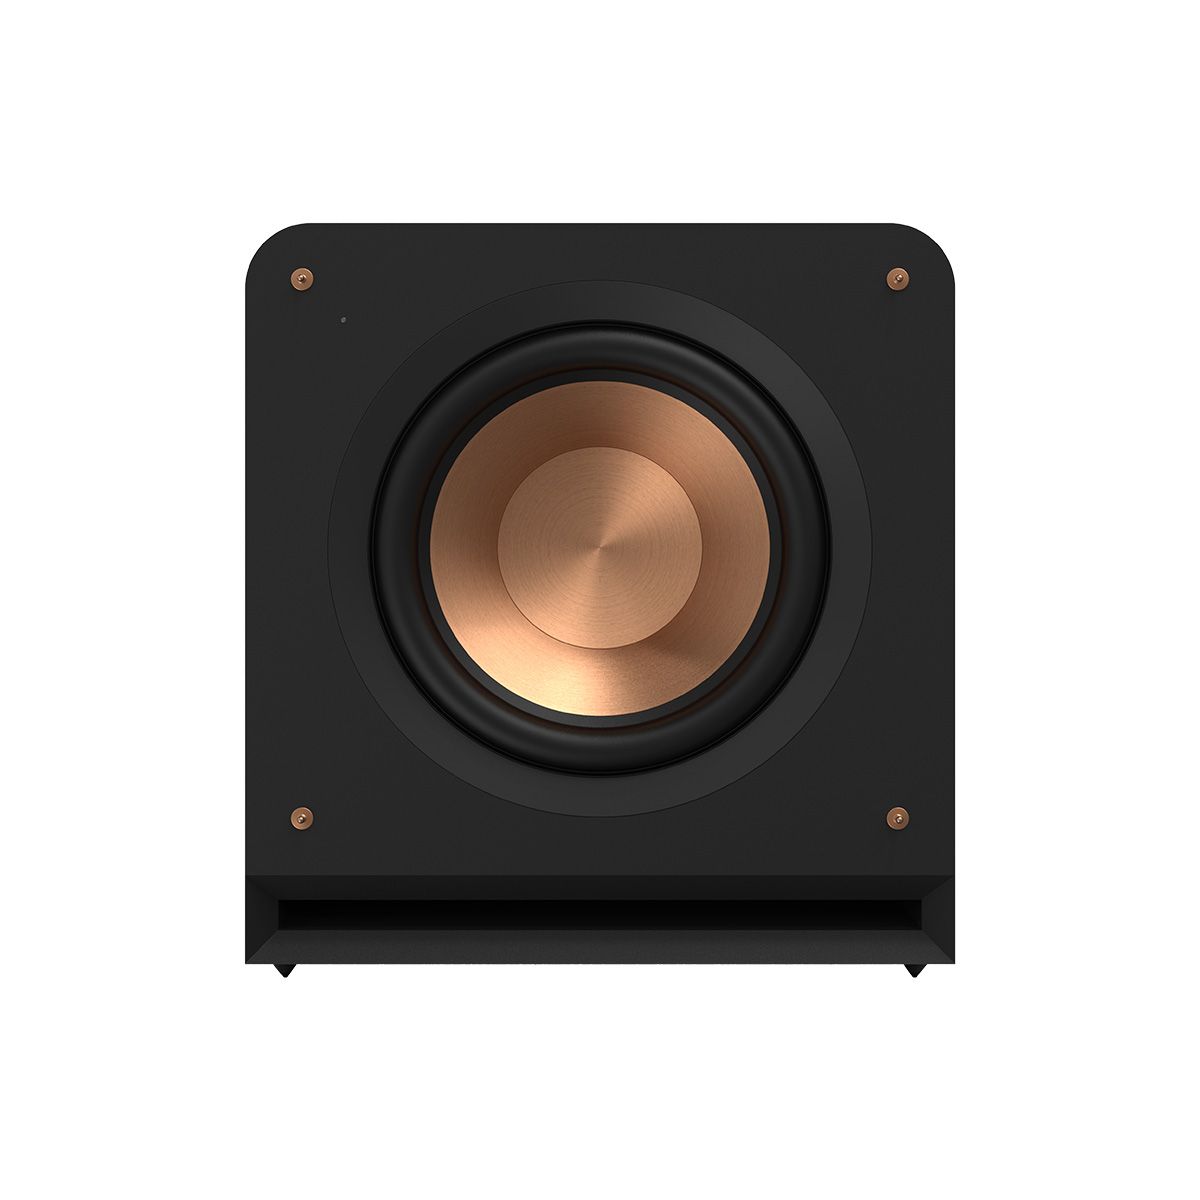 Klipsch RP-1200SW 12" Powered Subwoofer - Ebony - front view without grille